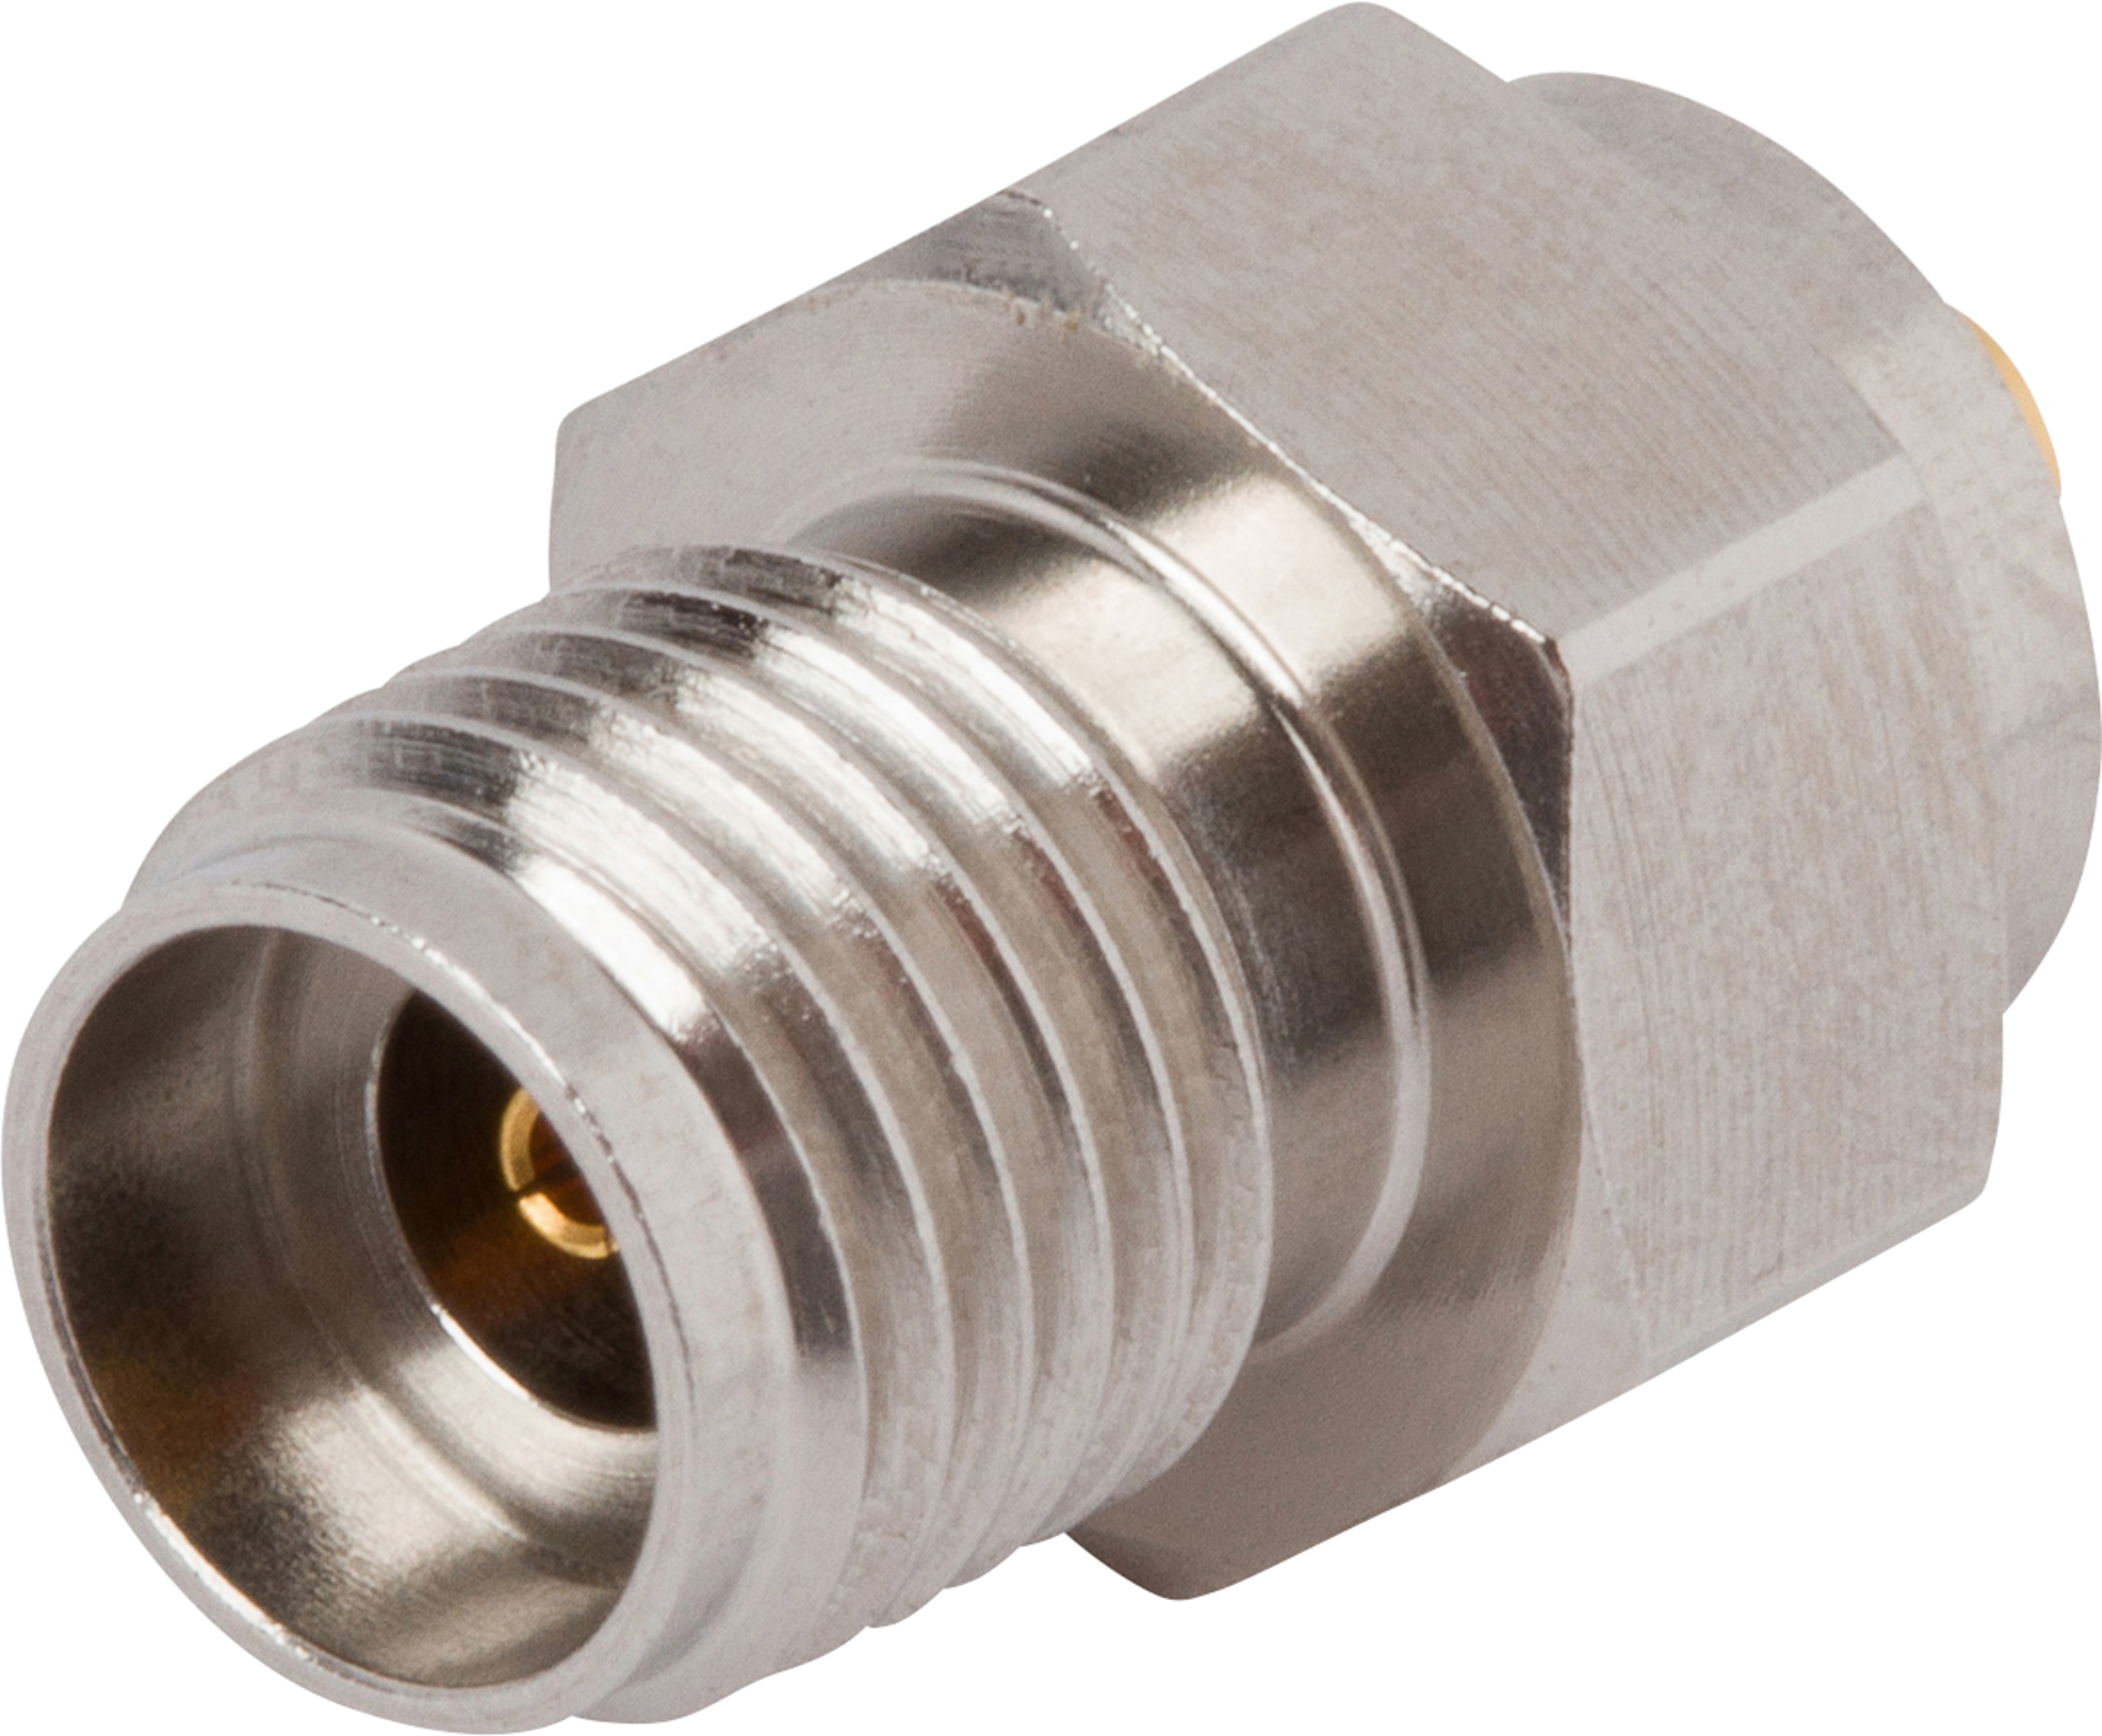 2.92mm Female Connector for .047 Cable, SF1521-60039